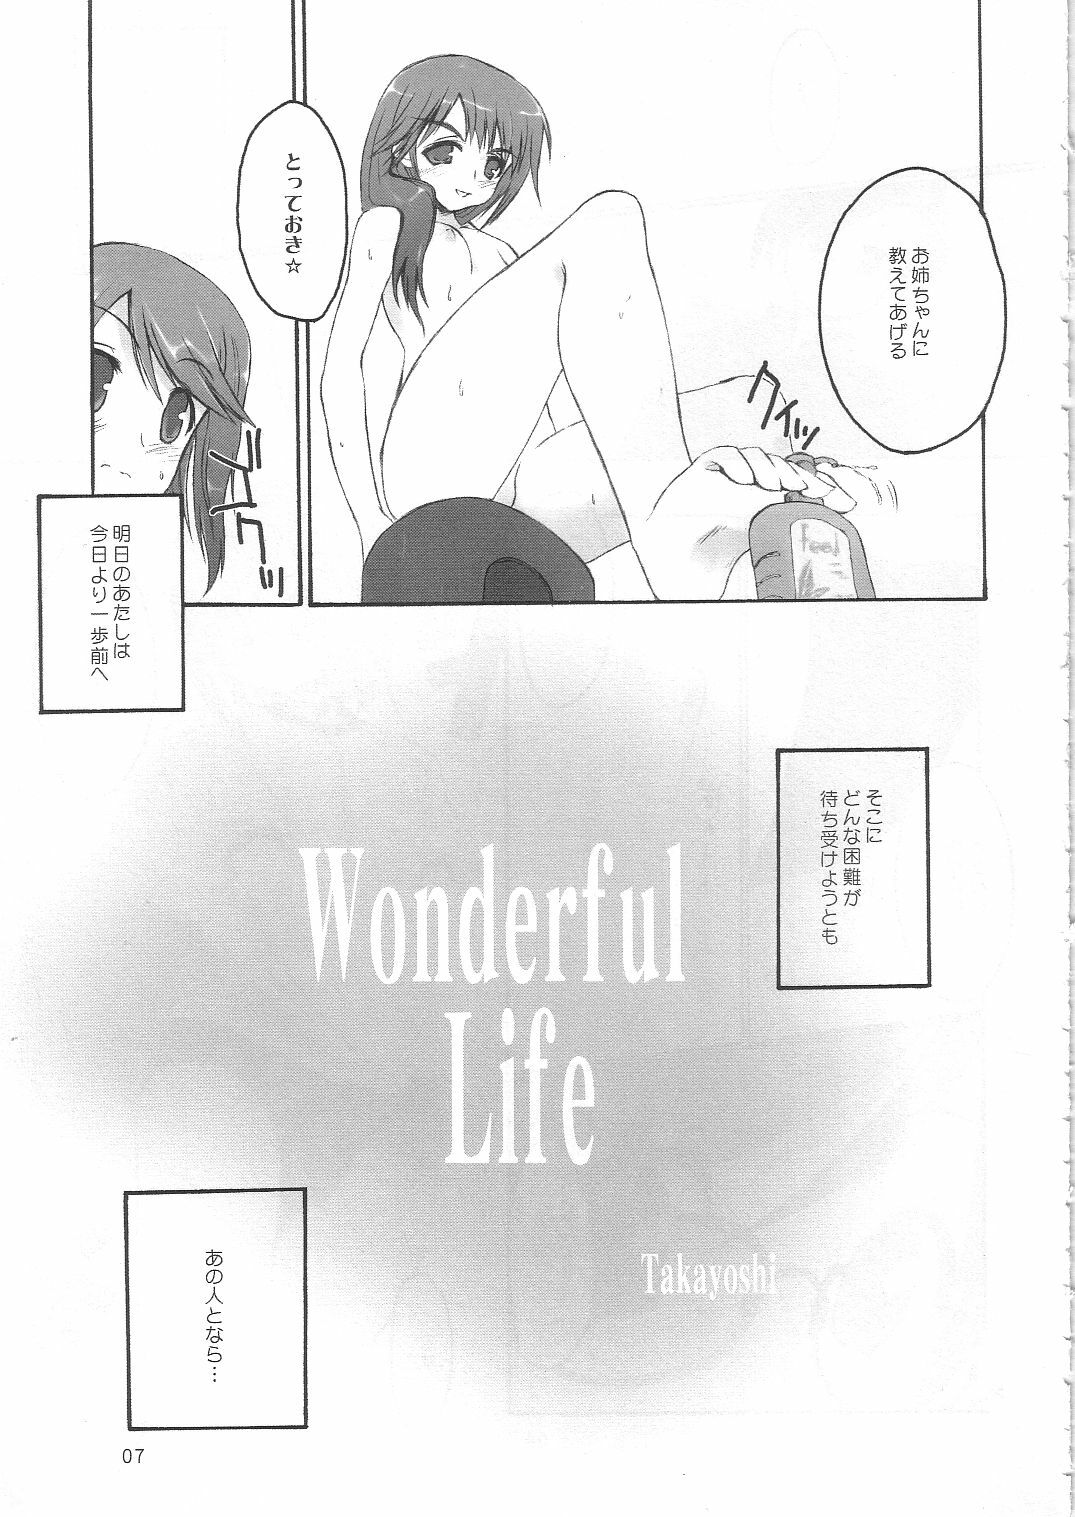 [4T] Wonderful Life (To Heart 2) page 6 full